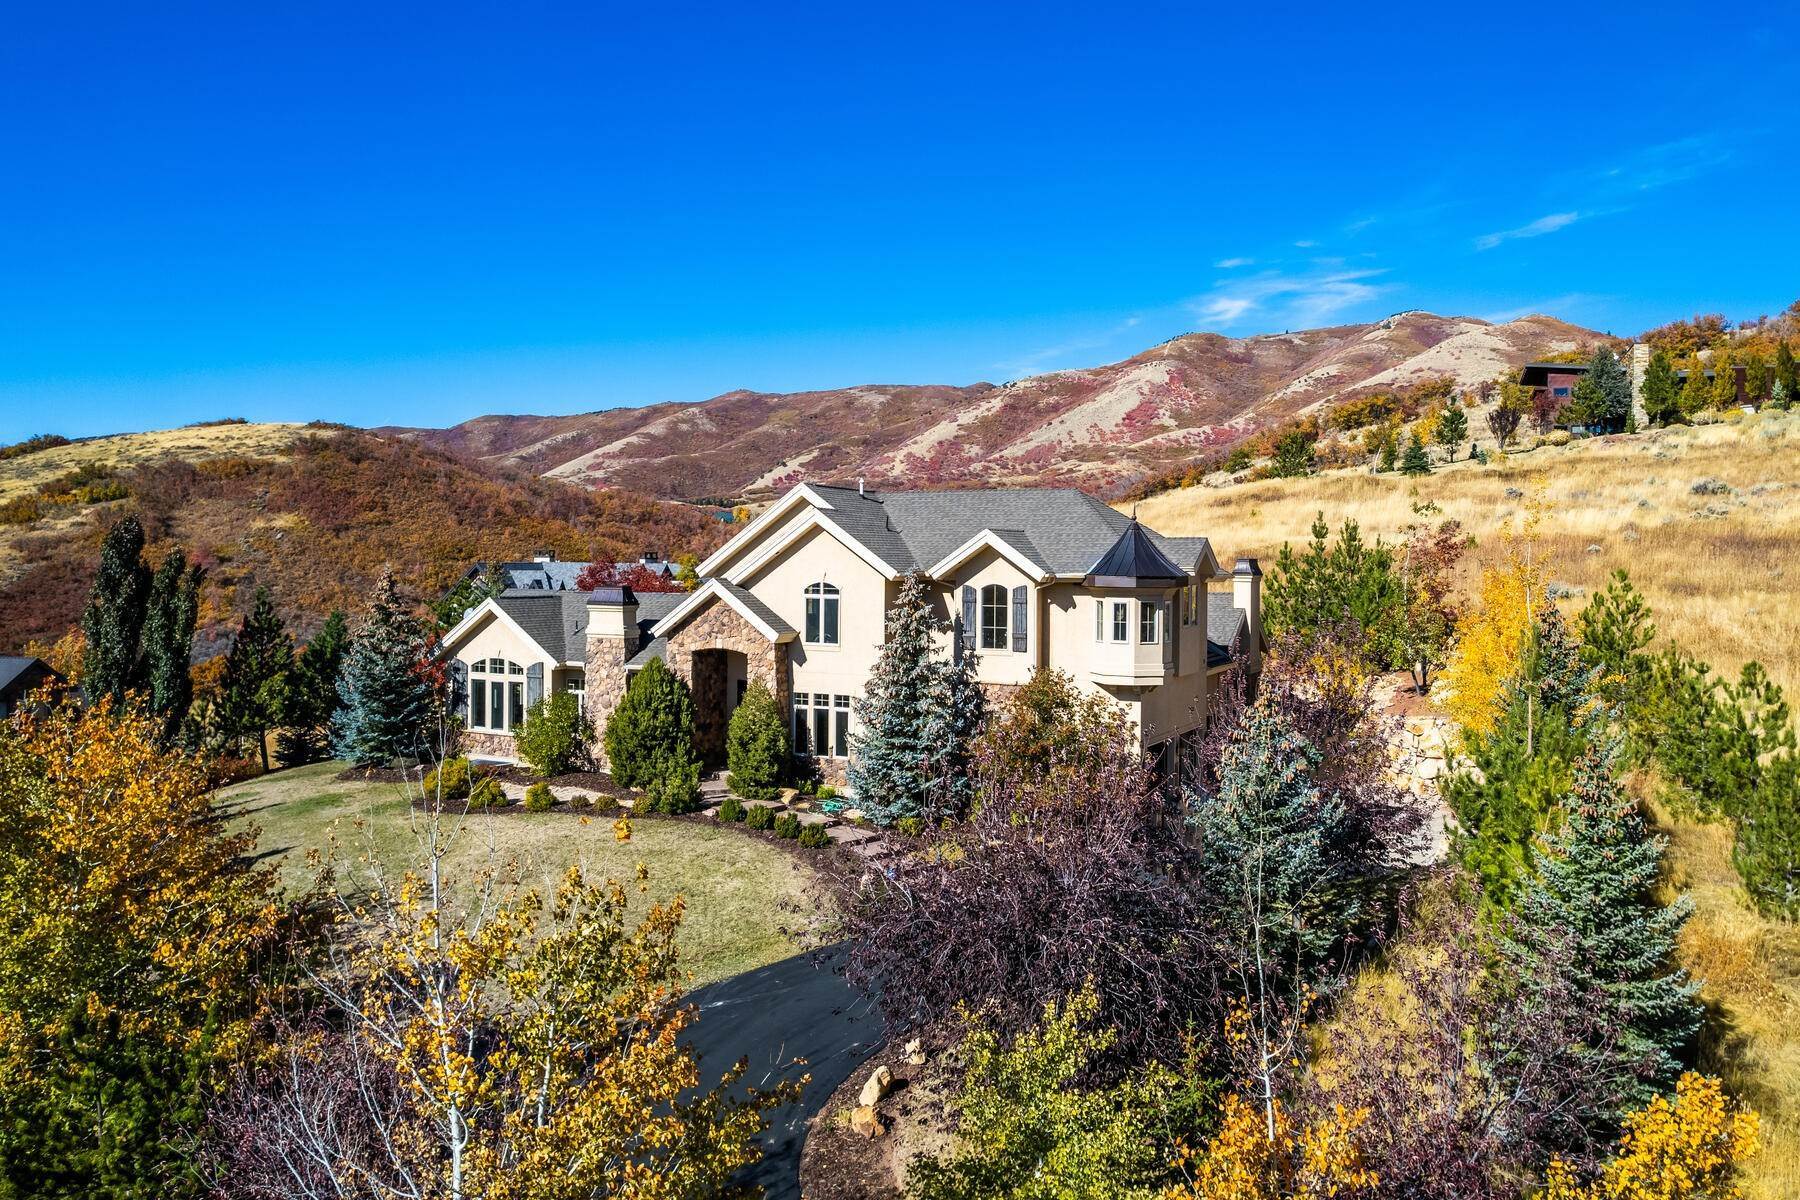 Single Family Homes for Sale at Peaceful Serene Emigration Canyon Home 617 Pioneer Fork Rd Salt Lake City, Utah 84108 United States